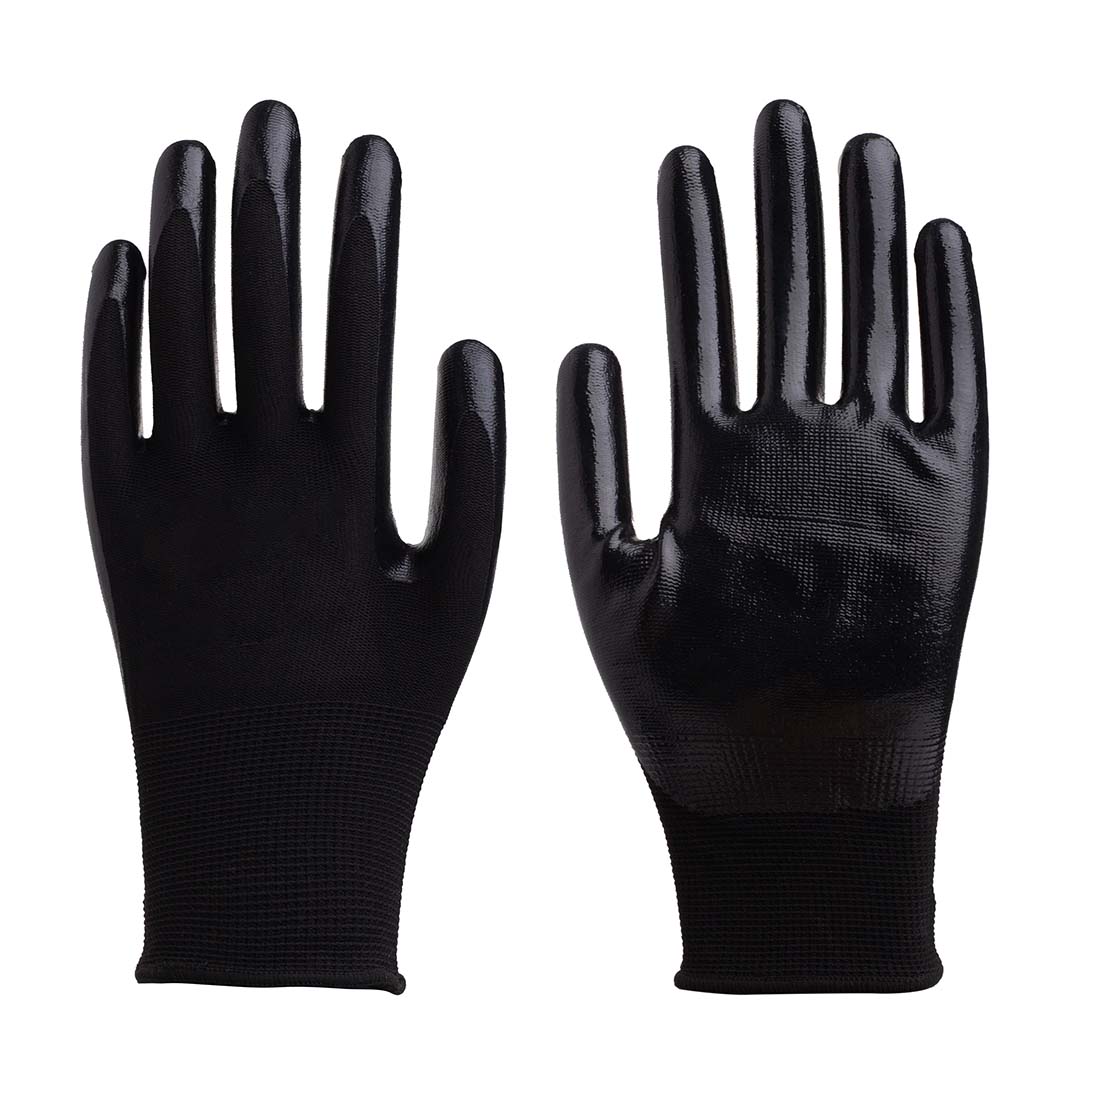 13G polyester glove smooth nitrile palm coated in black